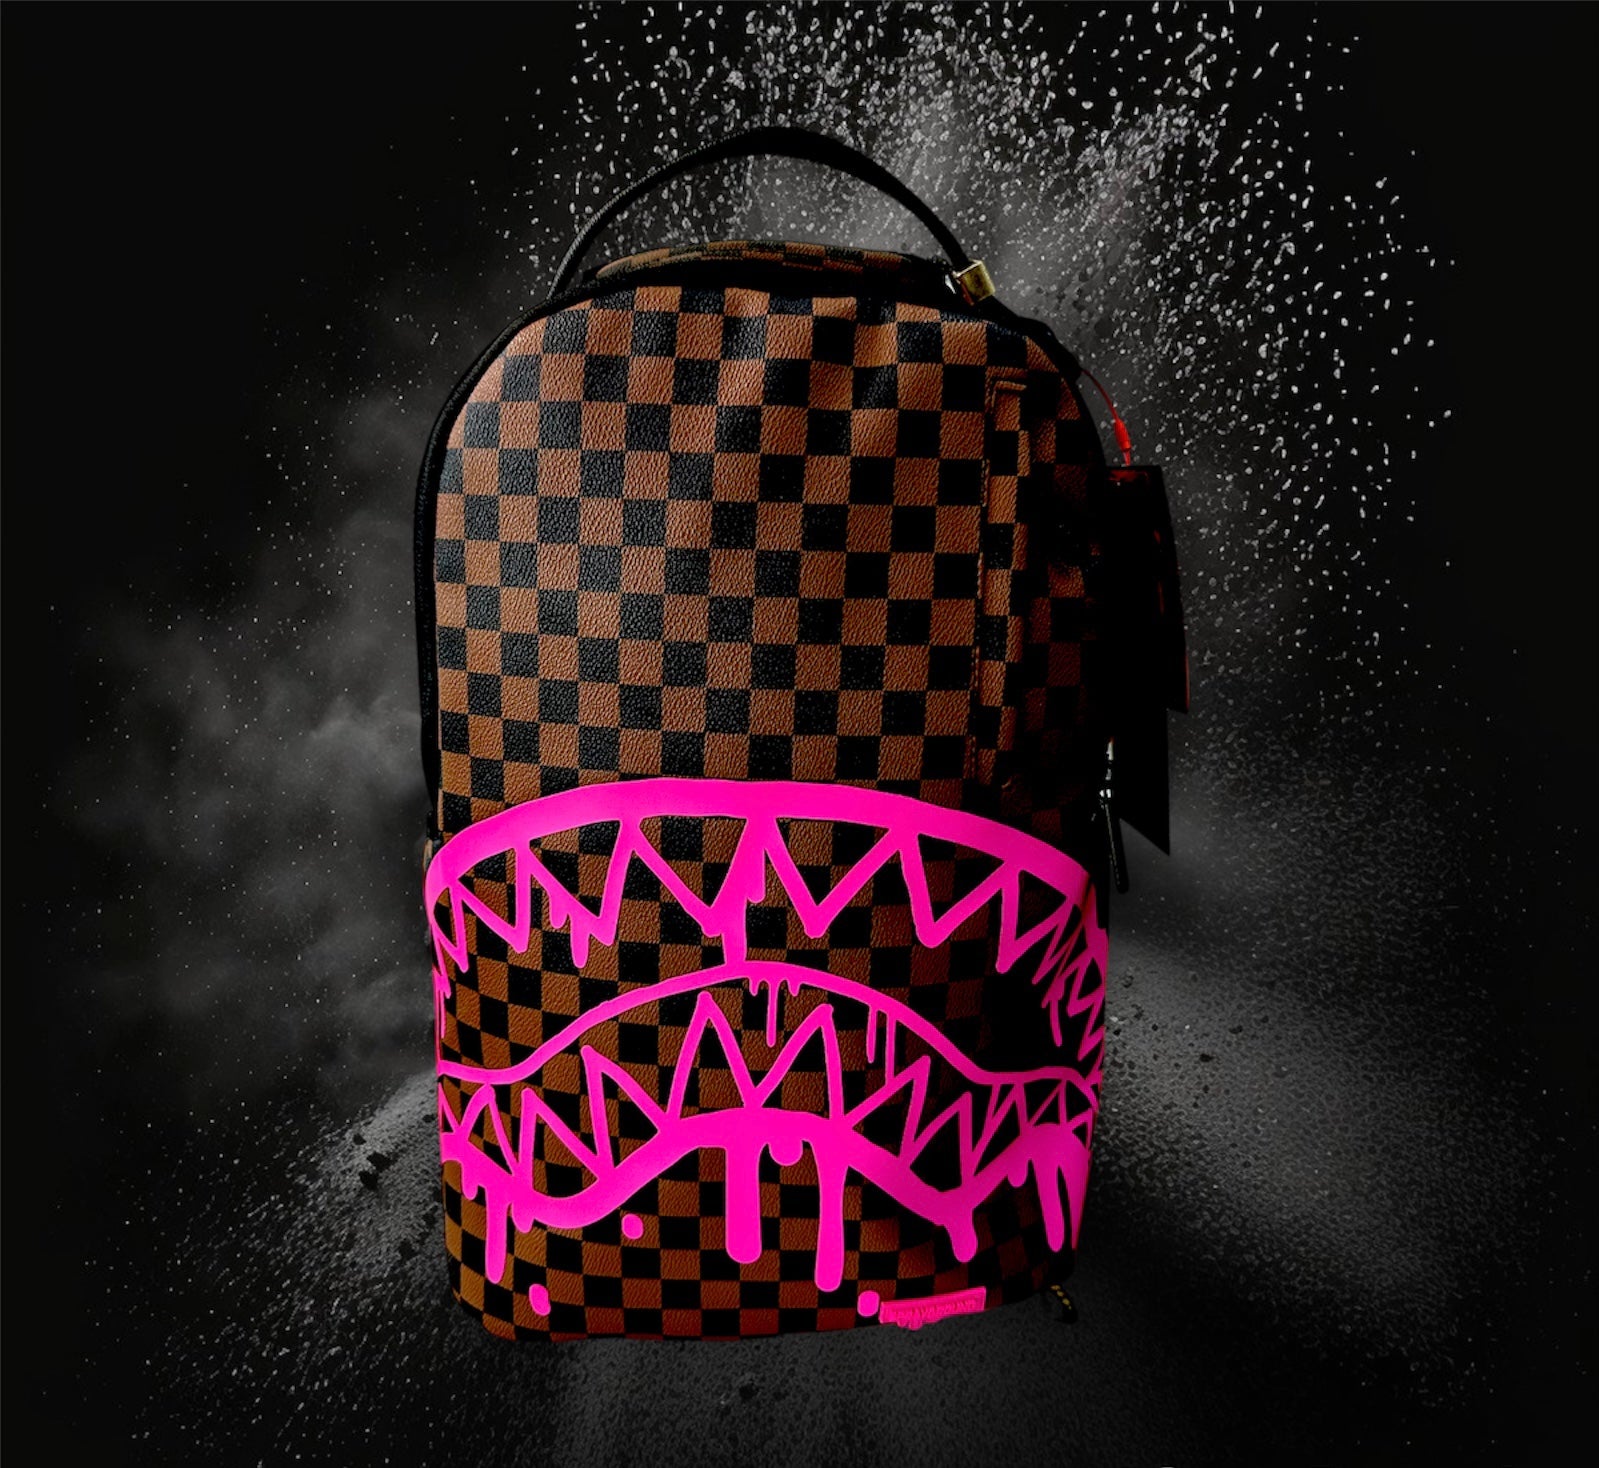 SPRAYGROUND-PARIS PAINT -- THE ARTISTS TOUCH BACKPACK (DLXV)